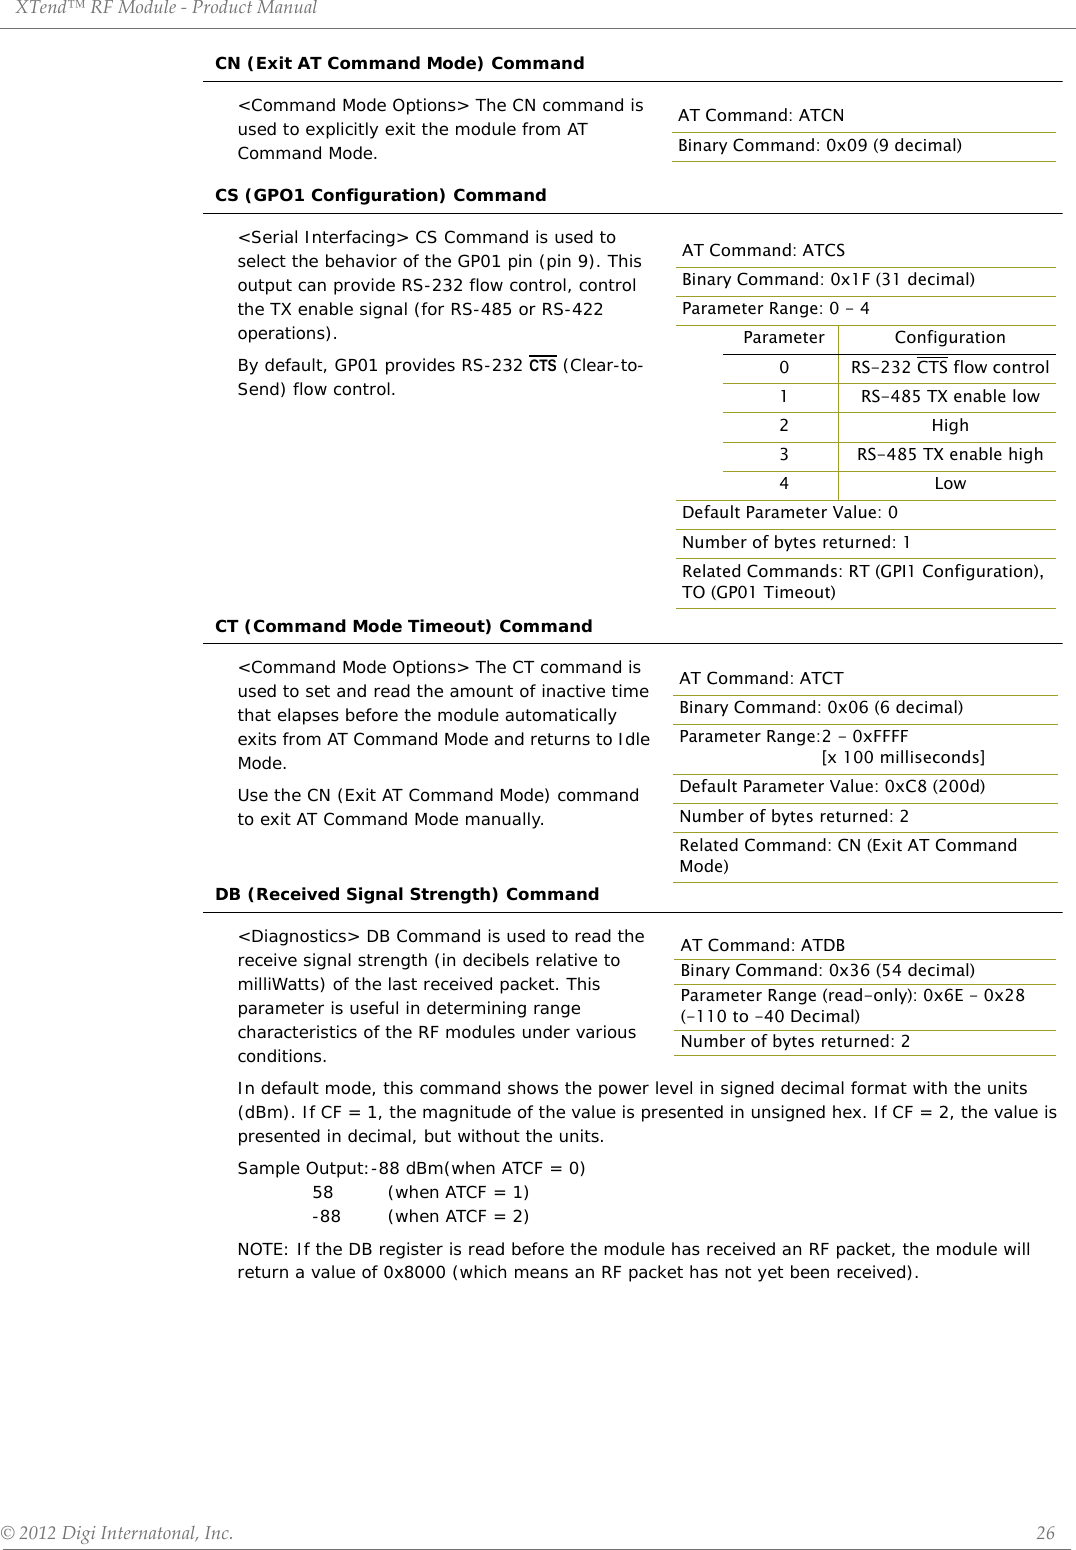 XTend™ RF Module - Product Manual © 2012 Digi Internatonal, Inc.      26CN (Exit AT Command Mode) Command&lt;Command Mode Options&gt; The CN command is used to explicitly exit the module from AT Command Mode.CS (GPO1 Configuration) Command&lt;Serial Interfacing&gt; CS Command is used to select the behavior of the GP01 pin (pin 9). This output can provide RS-232 flow control, control the TX enable signal (for RS-485 or RS-422 operations). By default, GP01 provides RS-232 CTS (Clear-to-Send) flow control.CT (Command Mode Timeout) Command&lt;Command Mode Options&gt; The CT command is used to set and read the amount of inactive time that elapses before the module automatically exits from AT Command Mode and returns to Idle Mode.Use the CN (Exit AT Command Mode) command to exit AT Command Mode manually.DB (Received Signal Strength) Command&lt;Diagnostics&gt; DB Command is used to read the receive signal strength (in decibels relative to milliWatts) of the last received packet. This parameter is useful in determining range characteristics of the RF modules under various conditions. In default mode, this command shows the power level in signed decimal format with the units (dBm). If CF = 1, the magnitude of the value is presented in unsigned hex. If CF = 2, the value is presented in decimal, but without the units.Sample Output:-88 dBm(when ATCF = 0) 58  (when ATCF = 1) -88  (when ATCF = 2)NOTE: If the DB register is read before the module has received an RF packet, the module will return a value of 0x8000 (which means an RF packet has not yet been received).AT Command: ATCNBinary Command: 0x09 (9 decimal)AT Command: ATCSBinary Command: 0x1F (31 decimal)Parameter Range: 0 - 4Parameter Configuration0 RS-232 CTS flow control1 RS-485 TX enable low2High3 RS-485 TX enable high4LowDefault Parameter Value: 0Number of bytes returned: 1Related Commands: RT (GPI1 Configuration), TO (GP01 Timeout)AT Command: ATCTBinary Command: 0x06 (6 decimal)Parameter Range:2 - 0xFFFF [x 100 milliseconds]Default Parameter Value: 0xC8 (200d)Number of bytes returned: 2Related Command: CN (Exit AT Command Mode)AT Command: ATDBBinary Command: 0x36 (54 decimal)Parameter Range (read-only): 0x6E - 0x28(-110 to -40 Decimal)Number of bytes returned: 2